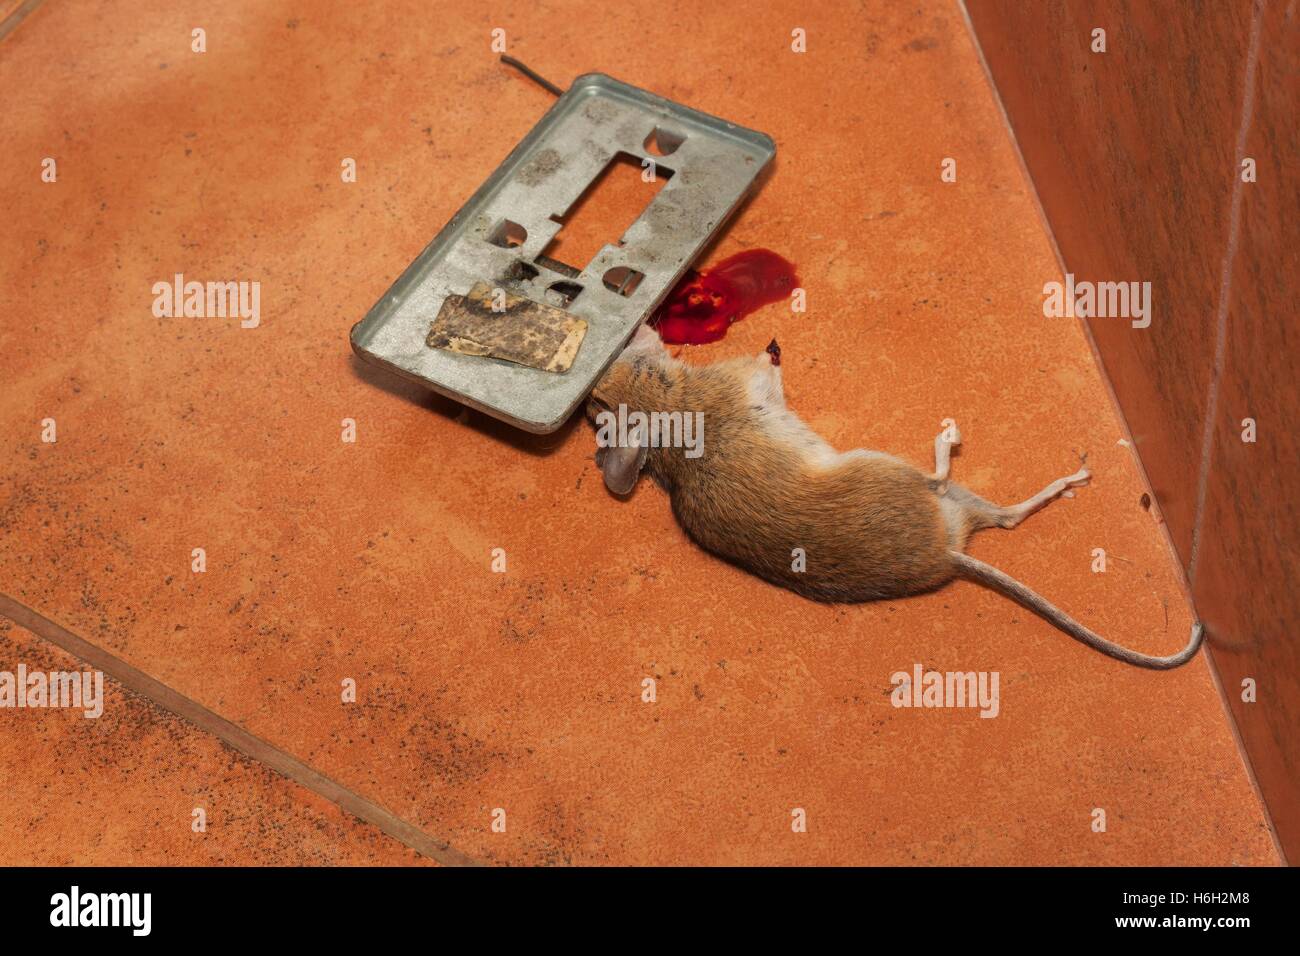 https://c8.alamy.com/comp/H6H2M8/dead-mouse-caught-in-traps-on-the-kitchen-pavement-small-mouse-in-H6H2M8.jpg